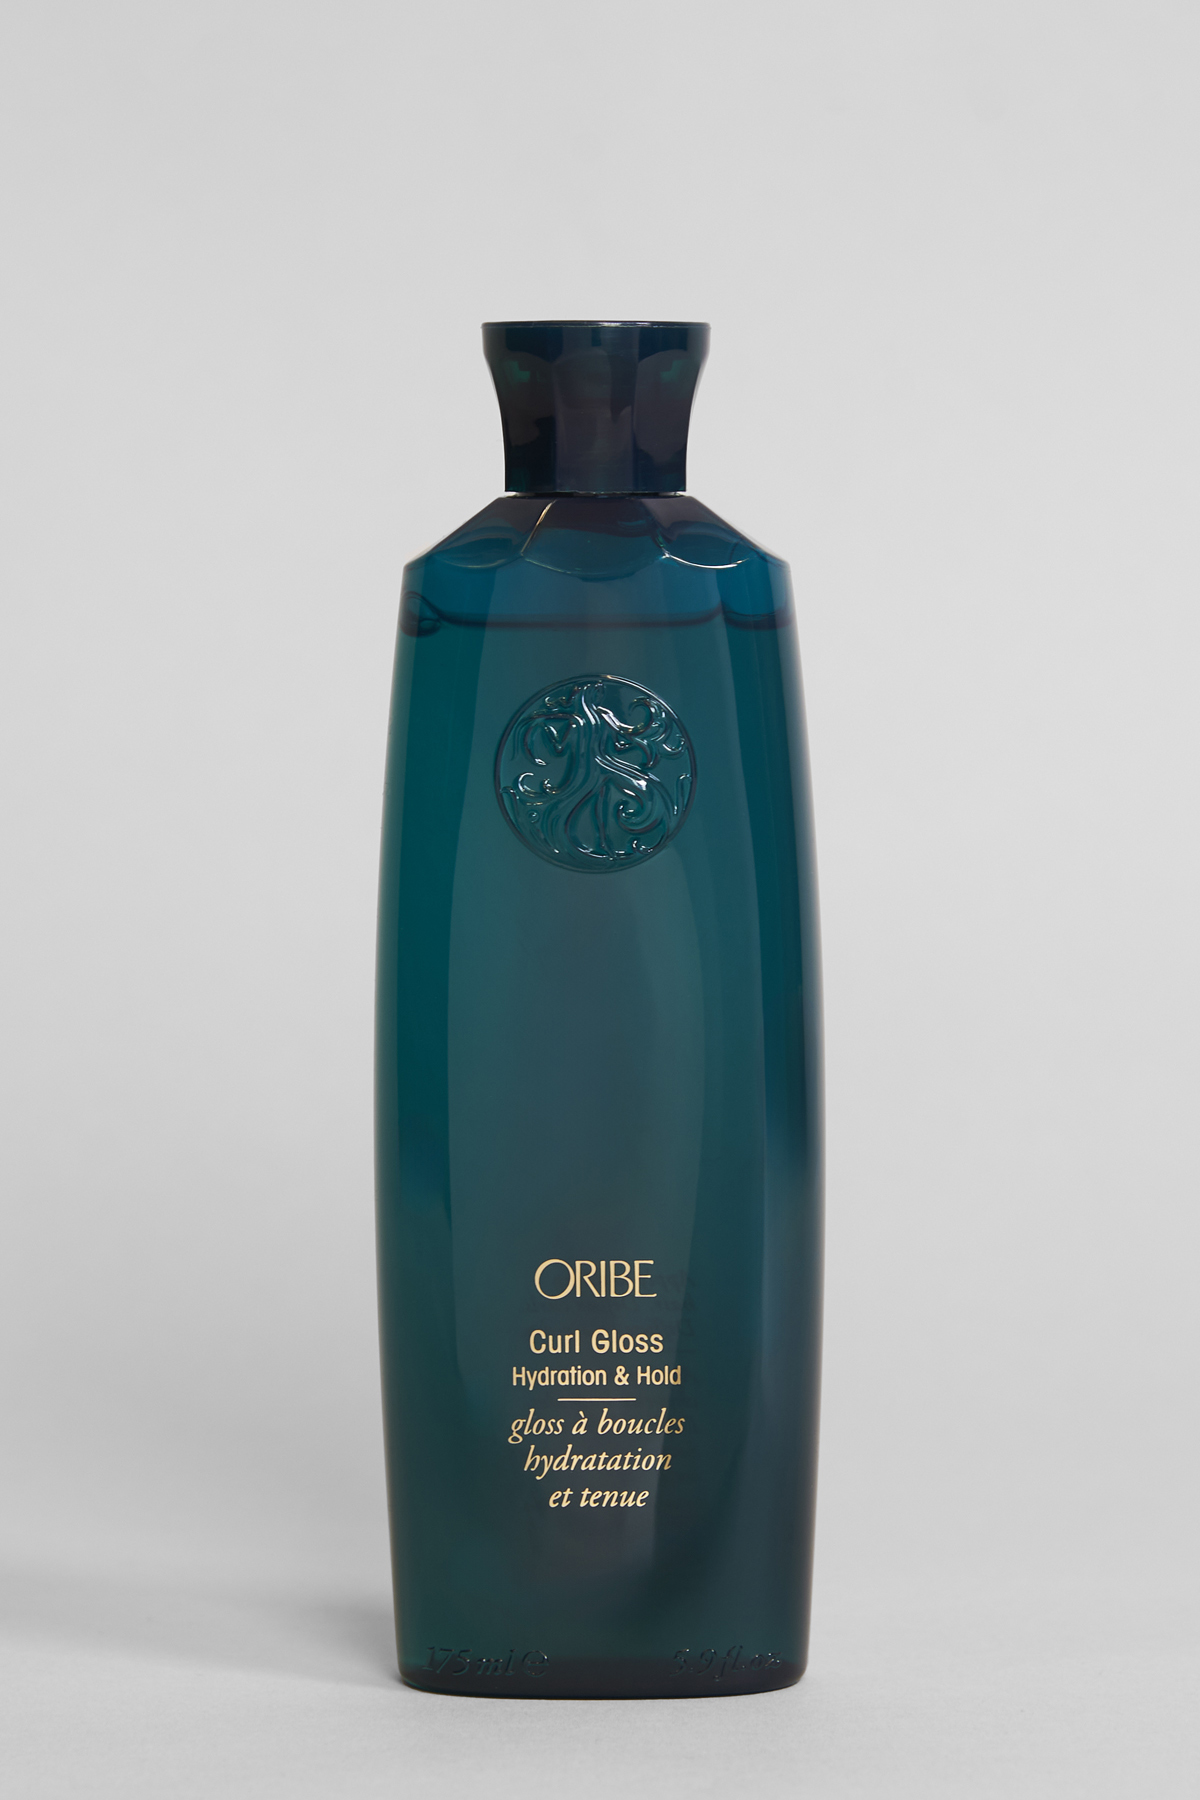 Oribe Curl Gloss Hydration & Hold shot in Marie Claire